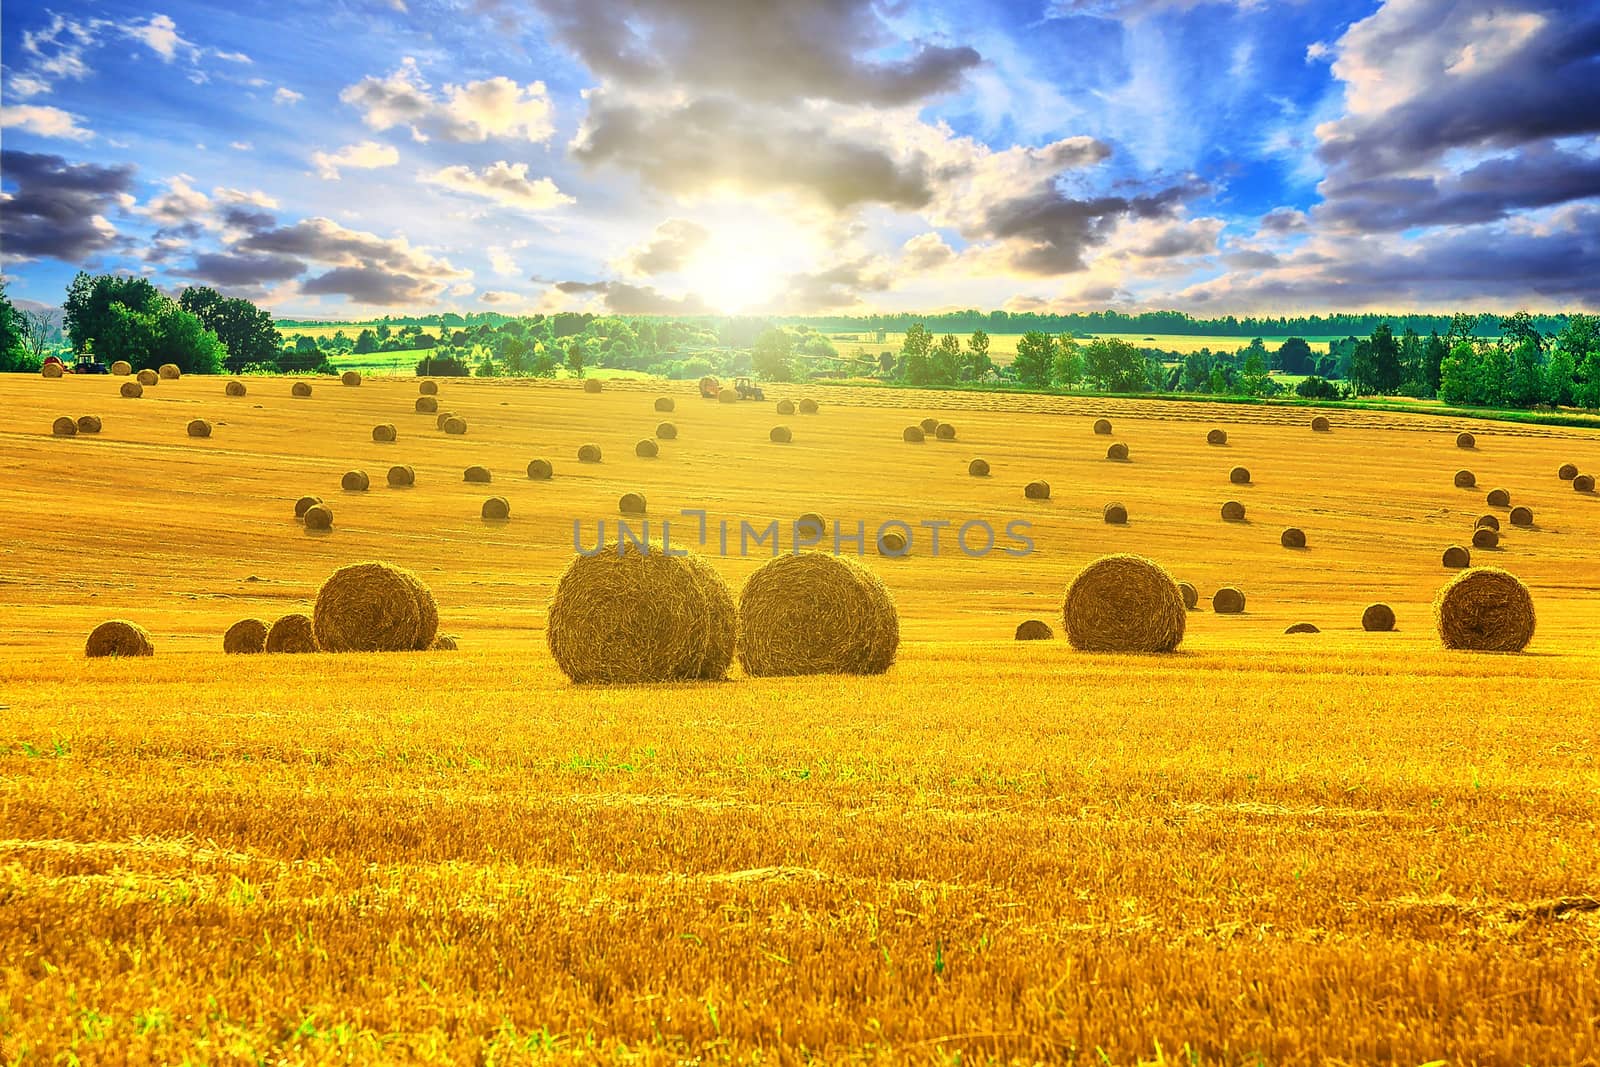 Yellow and Round Straw Bales in a  Field at end of Summer at Sunrise or sunset with Clouds after Harvest